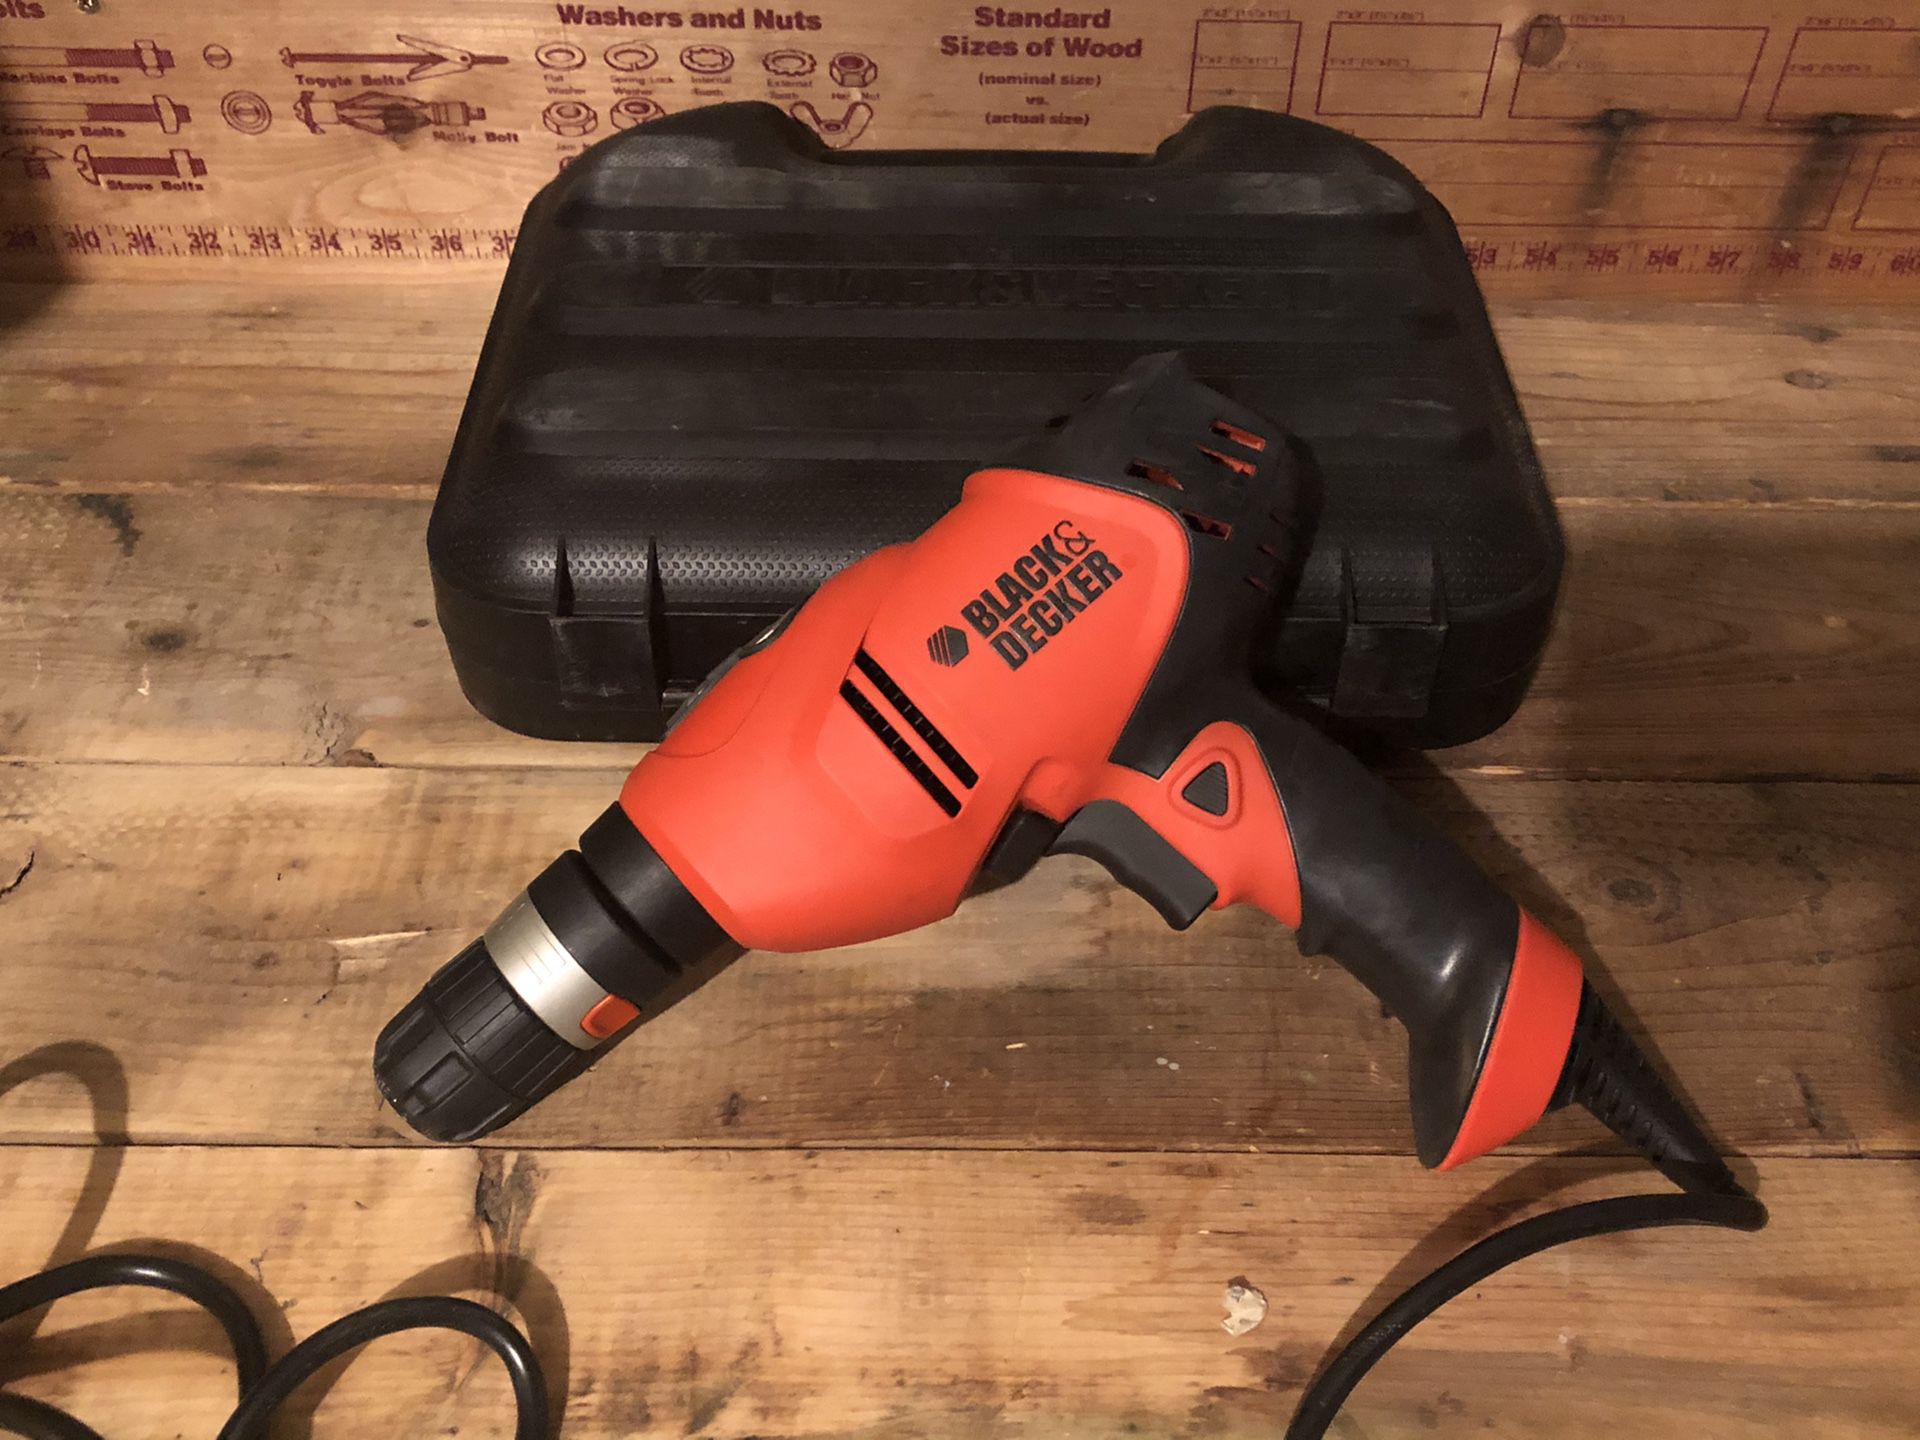 Black and Decker corded power drill